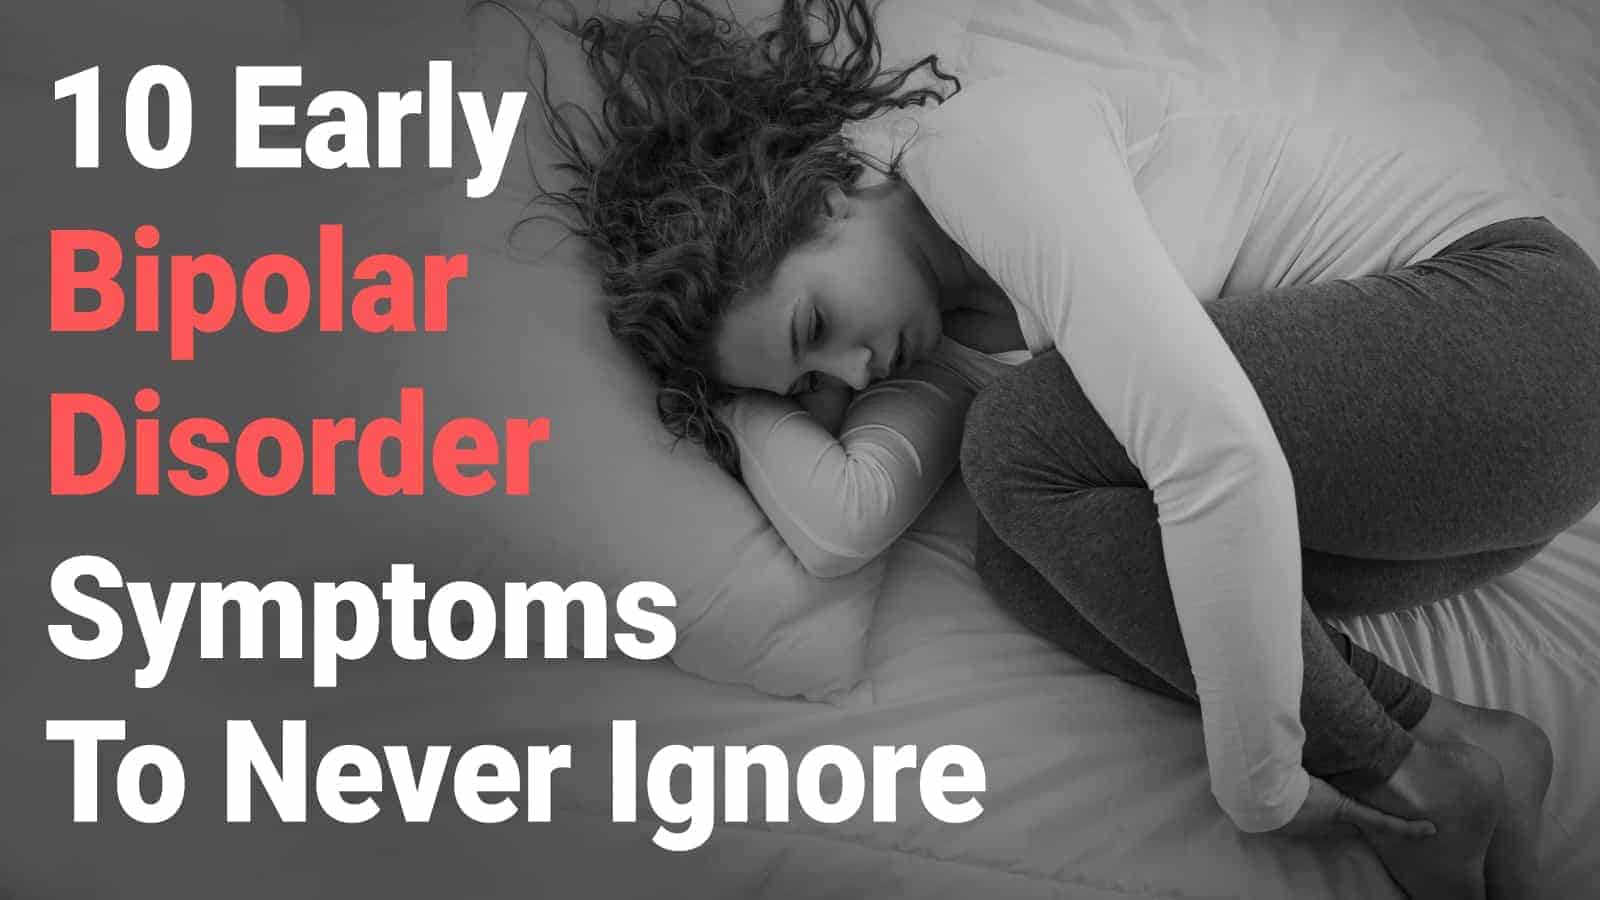 10 Early Bipolar Disorder Symptoms To Never Ignore